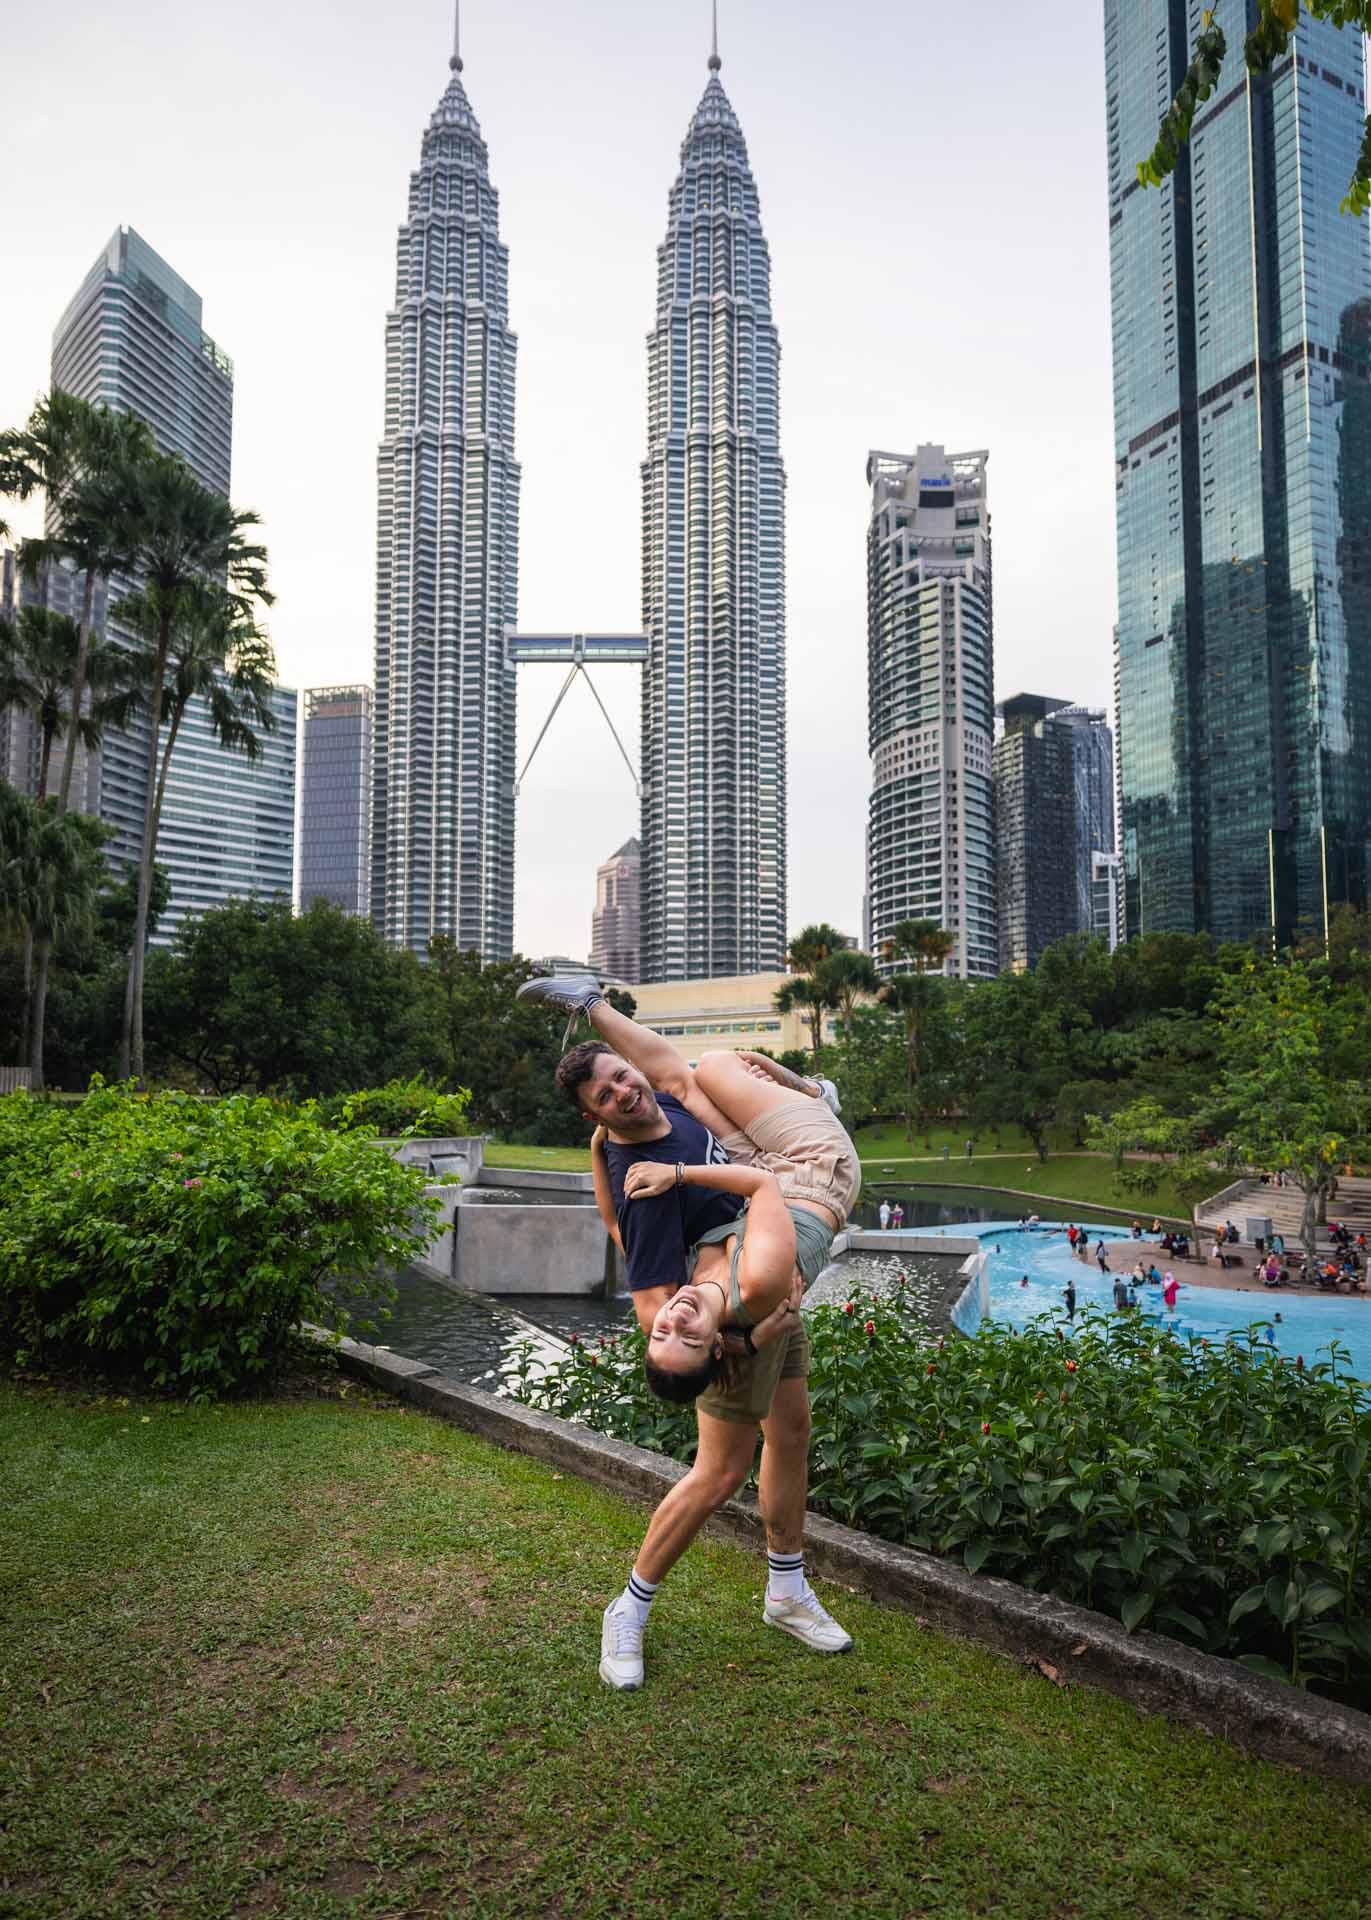 Ryan holding Sara upside down while posing in front of the Petronas Towers in Kuala Lumpur.